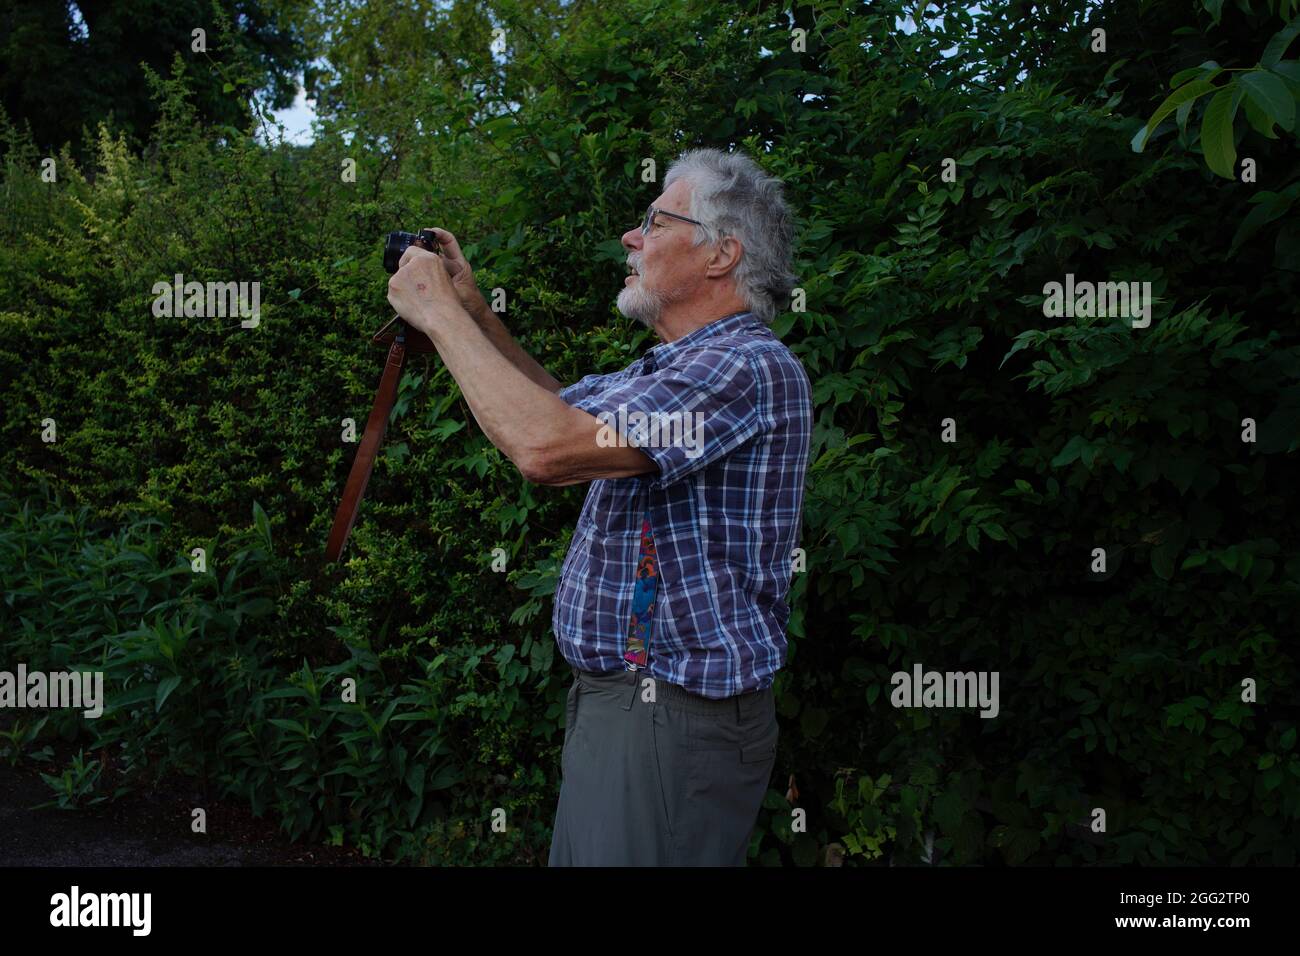 Retired man taking photograph in rural setting Stock Photo